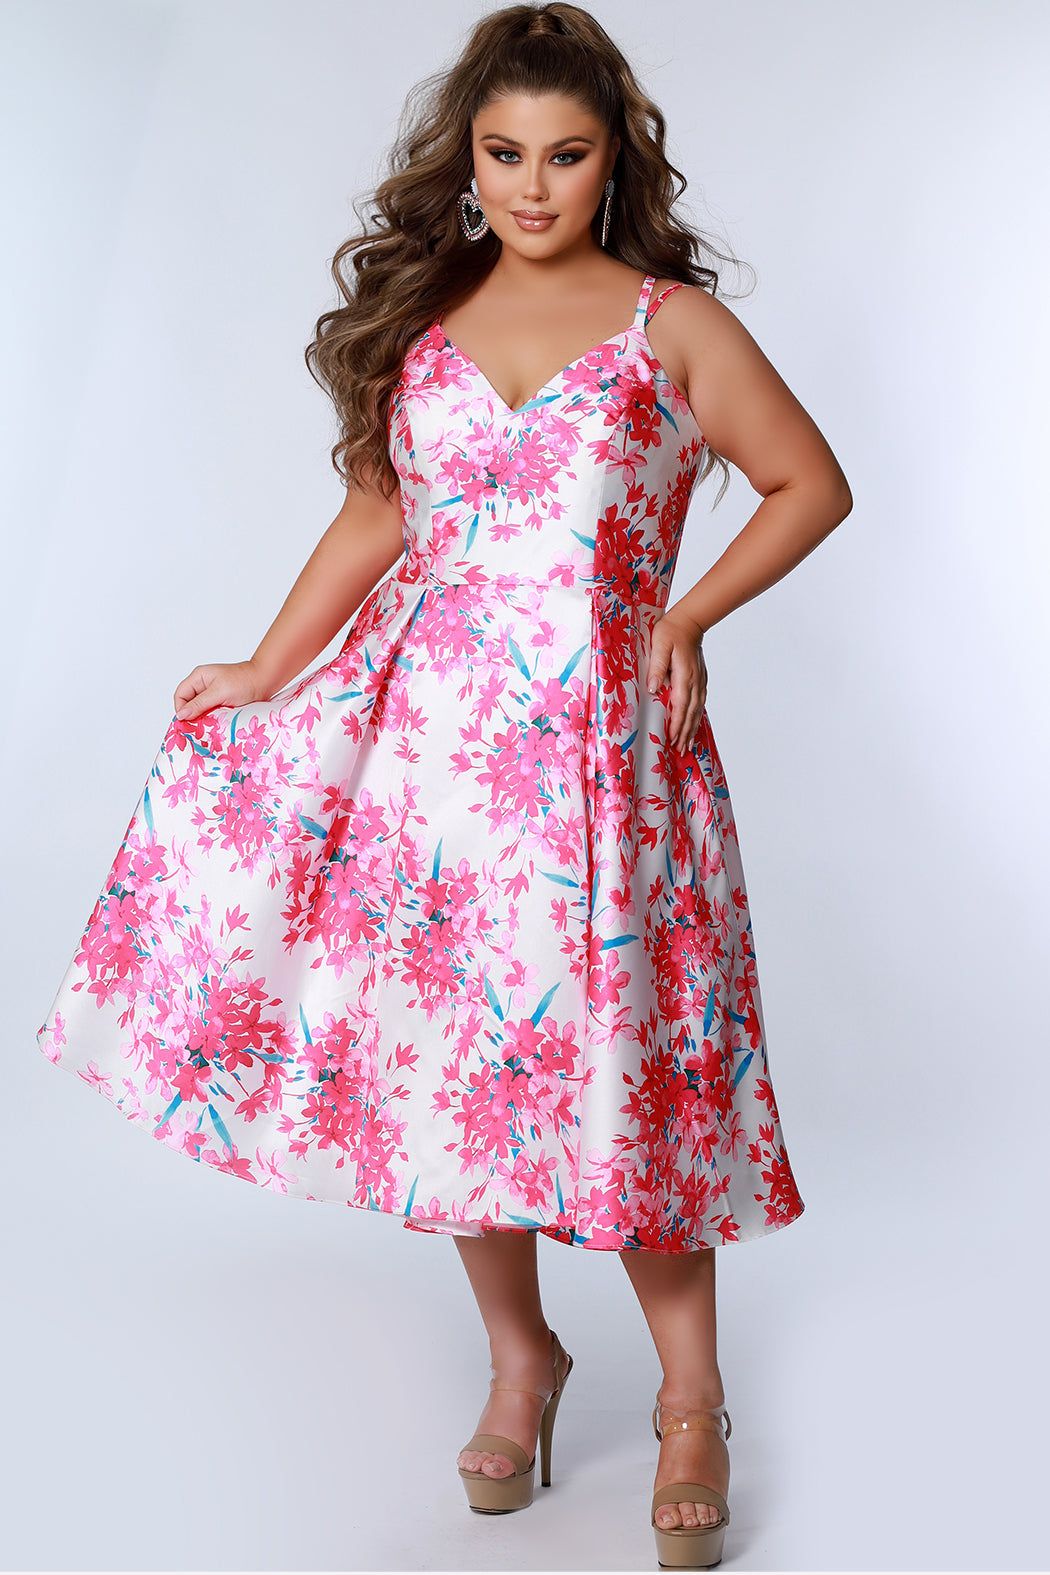 Style CE2209 Sydney's Closet Plus Size 30 Prom Satin Pink Cocktail Dress on Queenly